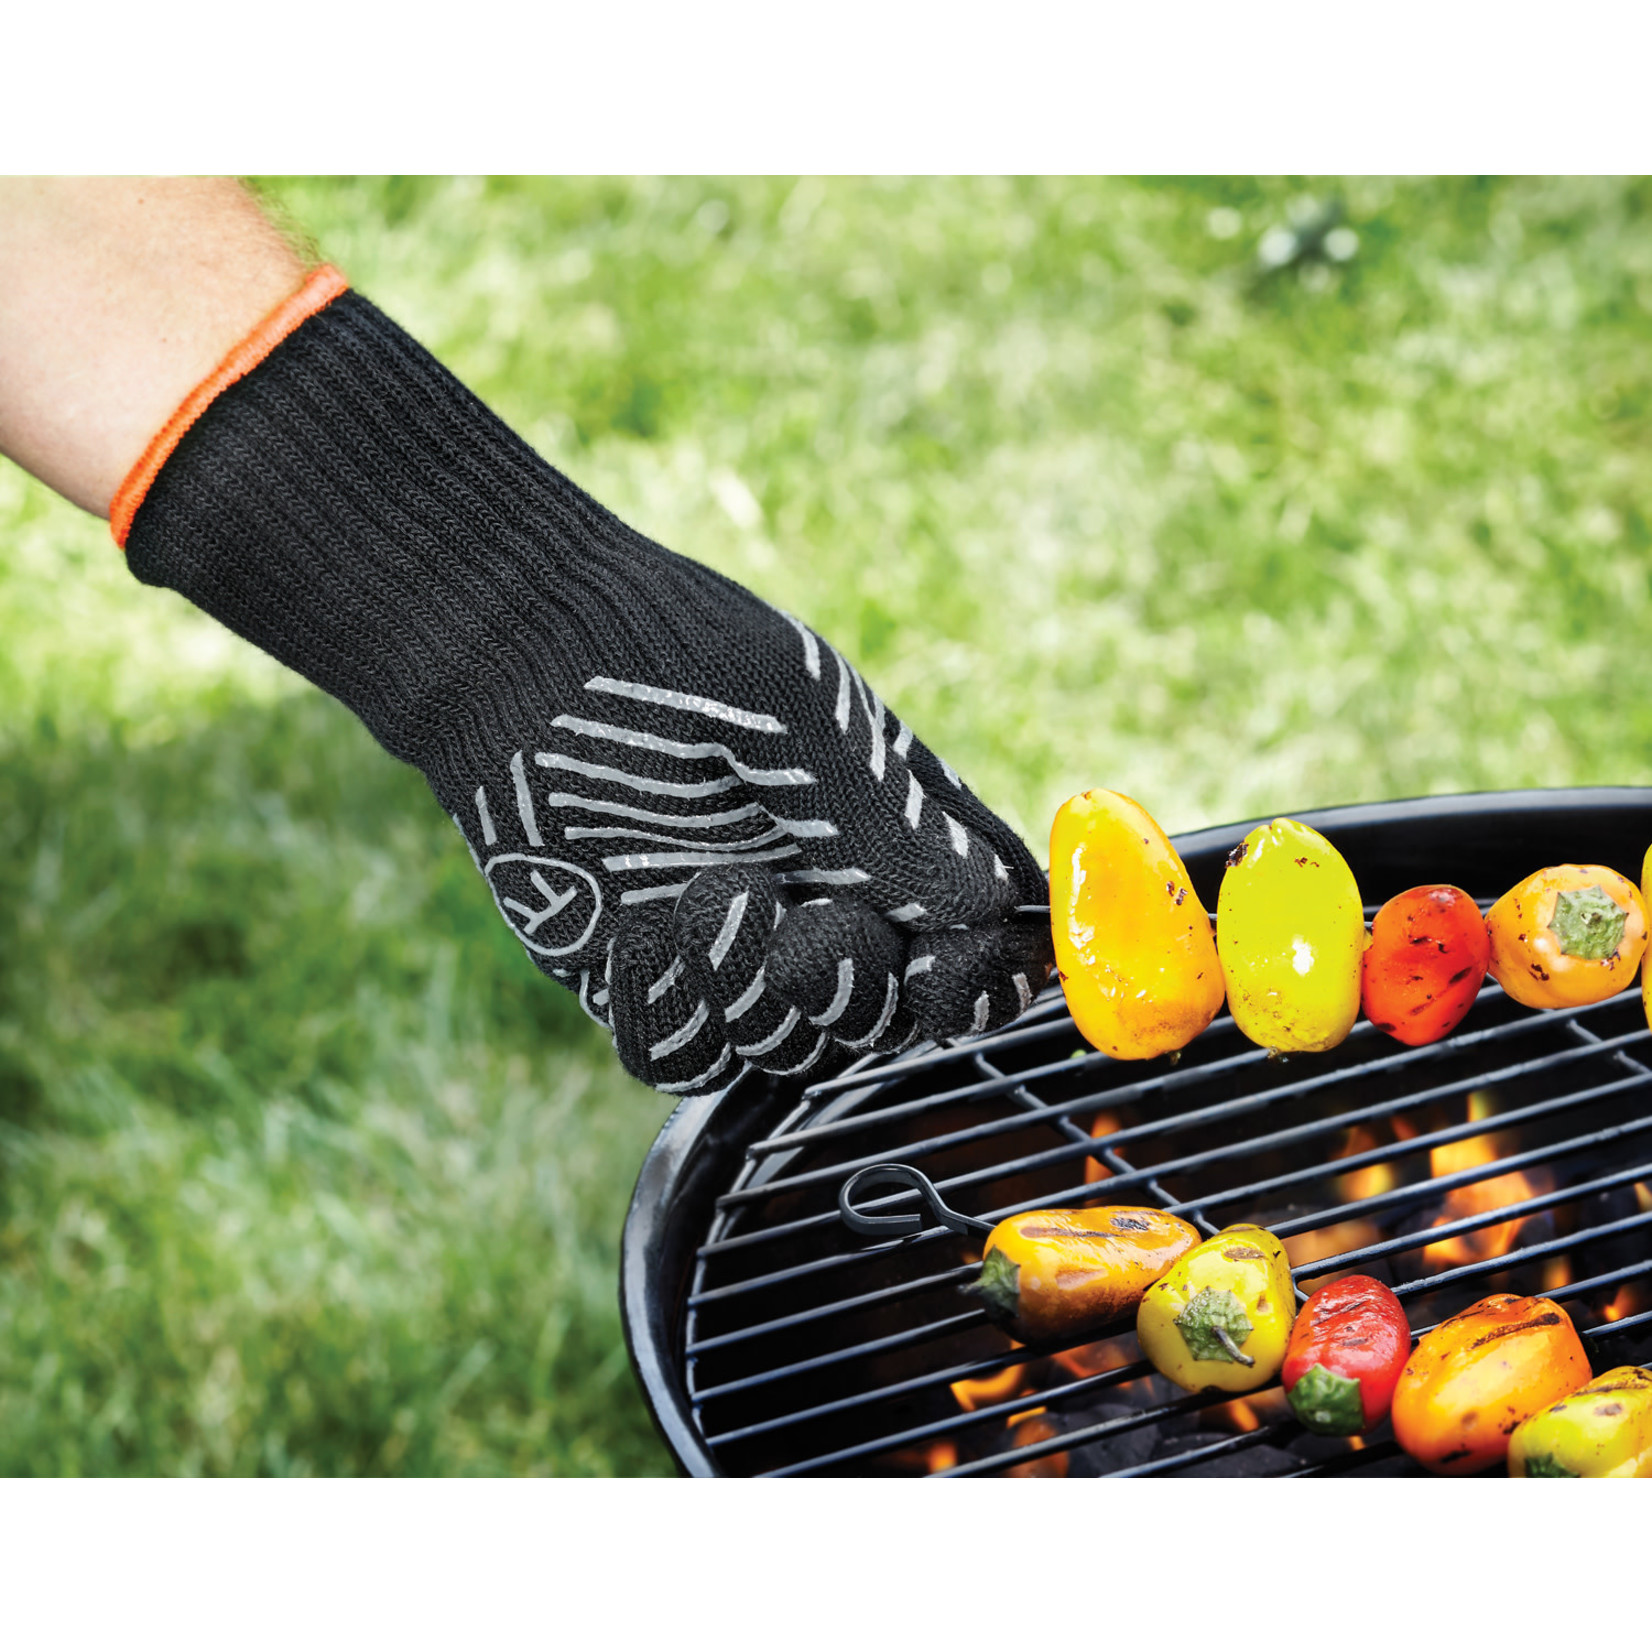 OUTSET OUTSET Oven Glove Professional High Temp